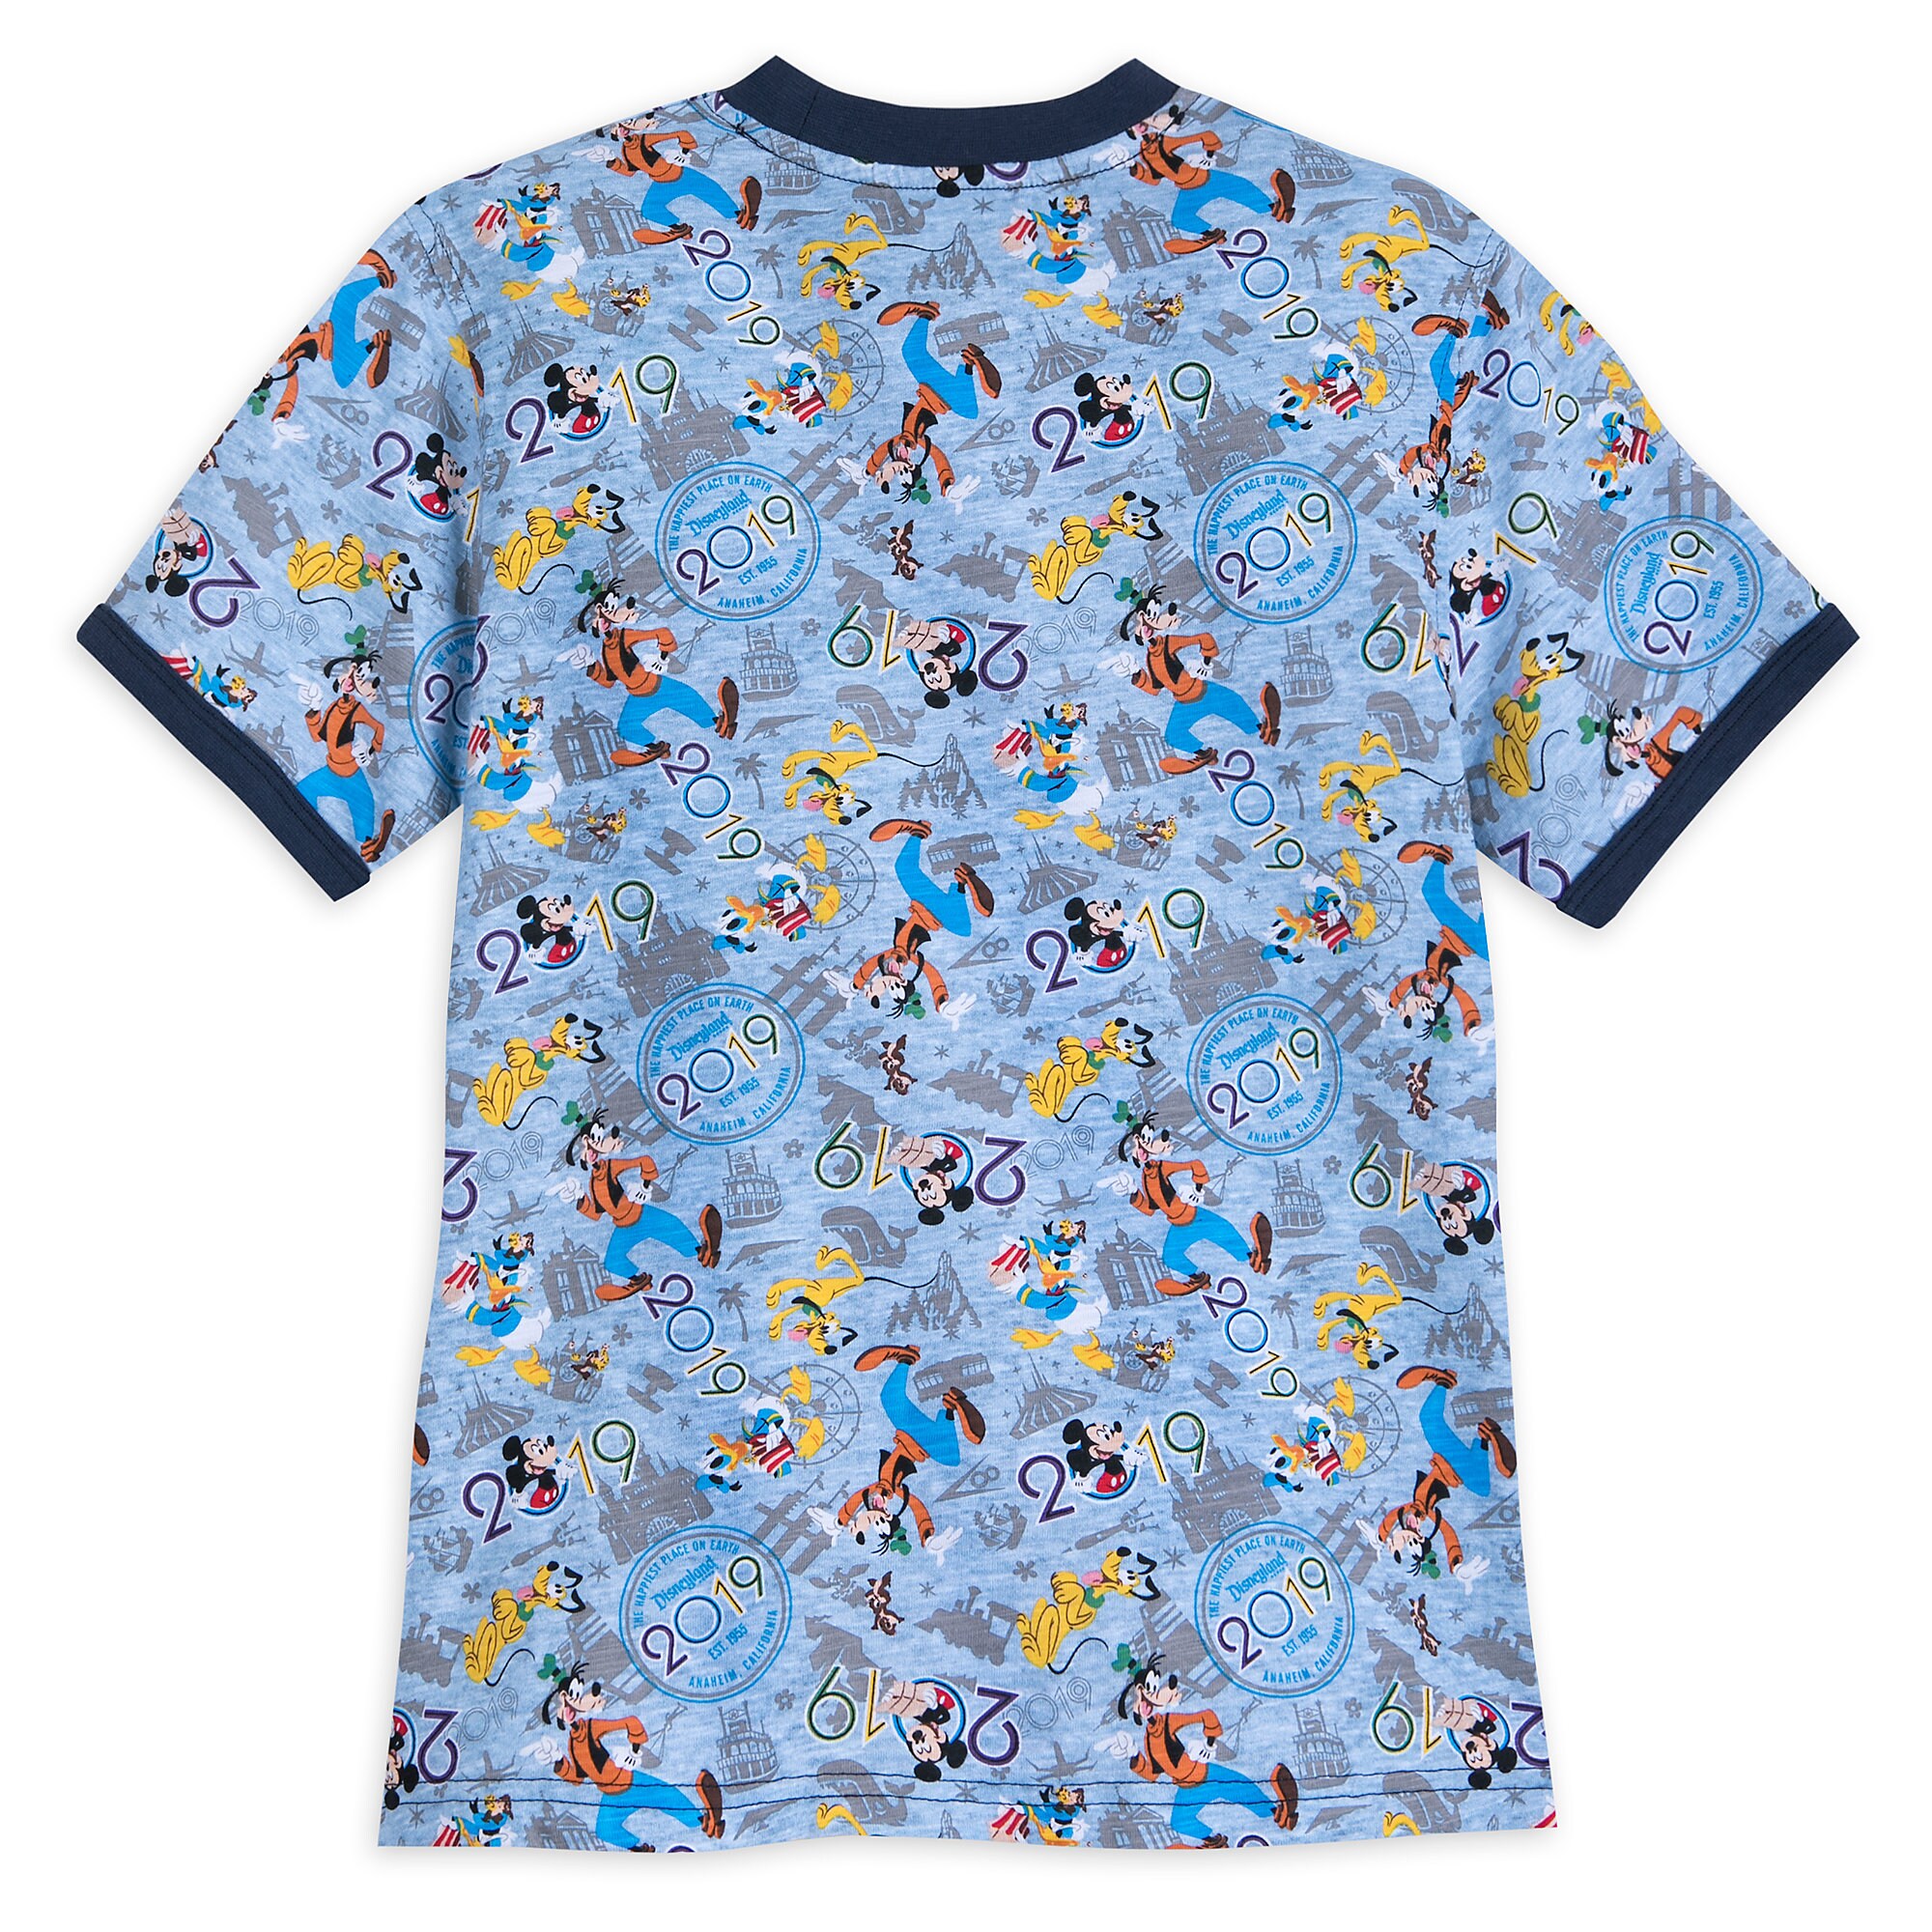 Mickey Mouse and Friends Ringer T-Shirt for Kids - Disneyland 2019 has ...